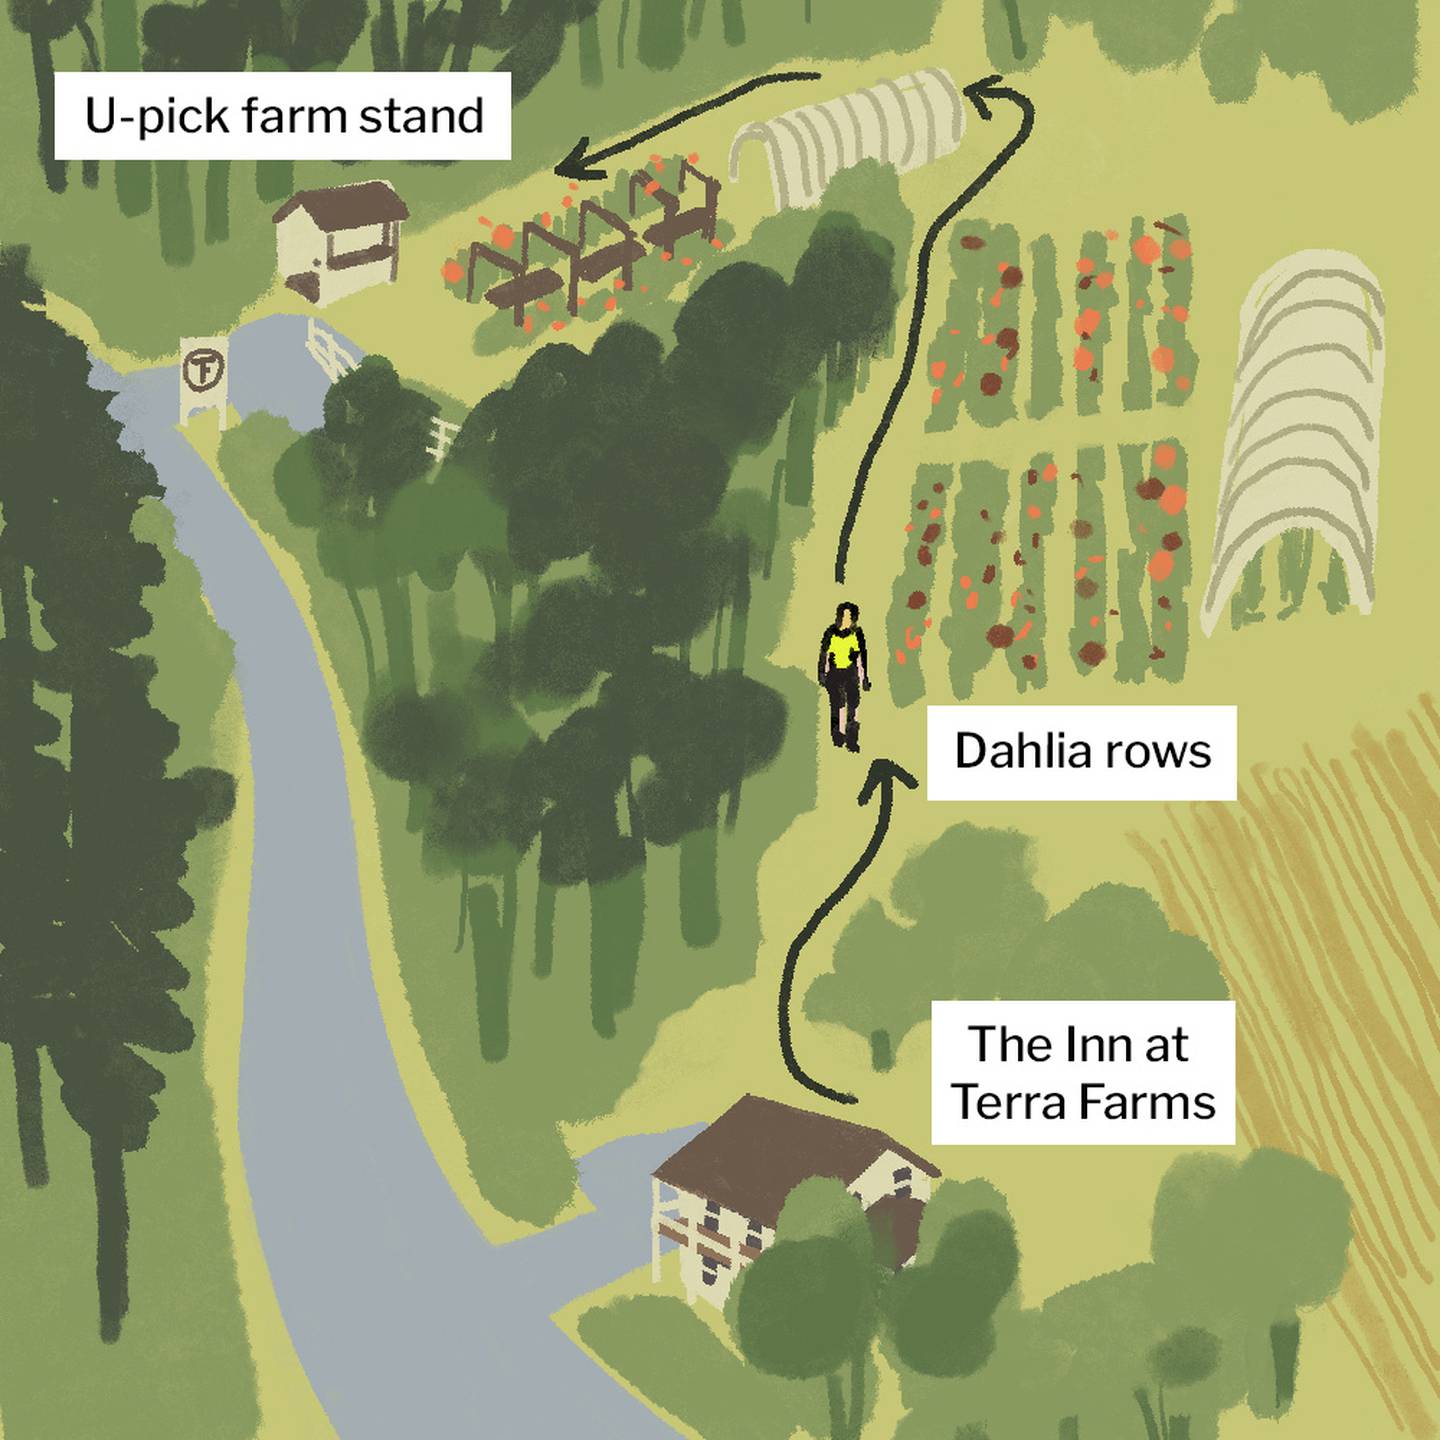 Illustrated map shows a farm along a country road, seen from the air. In the bottom of the map is a white building labeled the Inn at Terra Farms. A small figure walks up from the inn along some trees past rows of dahlia flowers and a grow tunnel. An arrow shows the path up and around the trees past another grow tunnel and flowers to a you-pick farm stand.